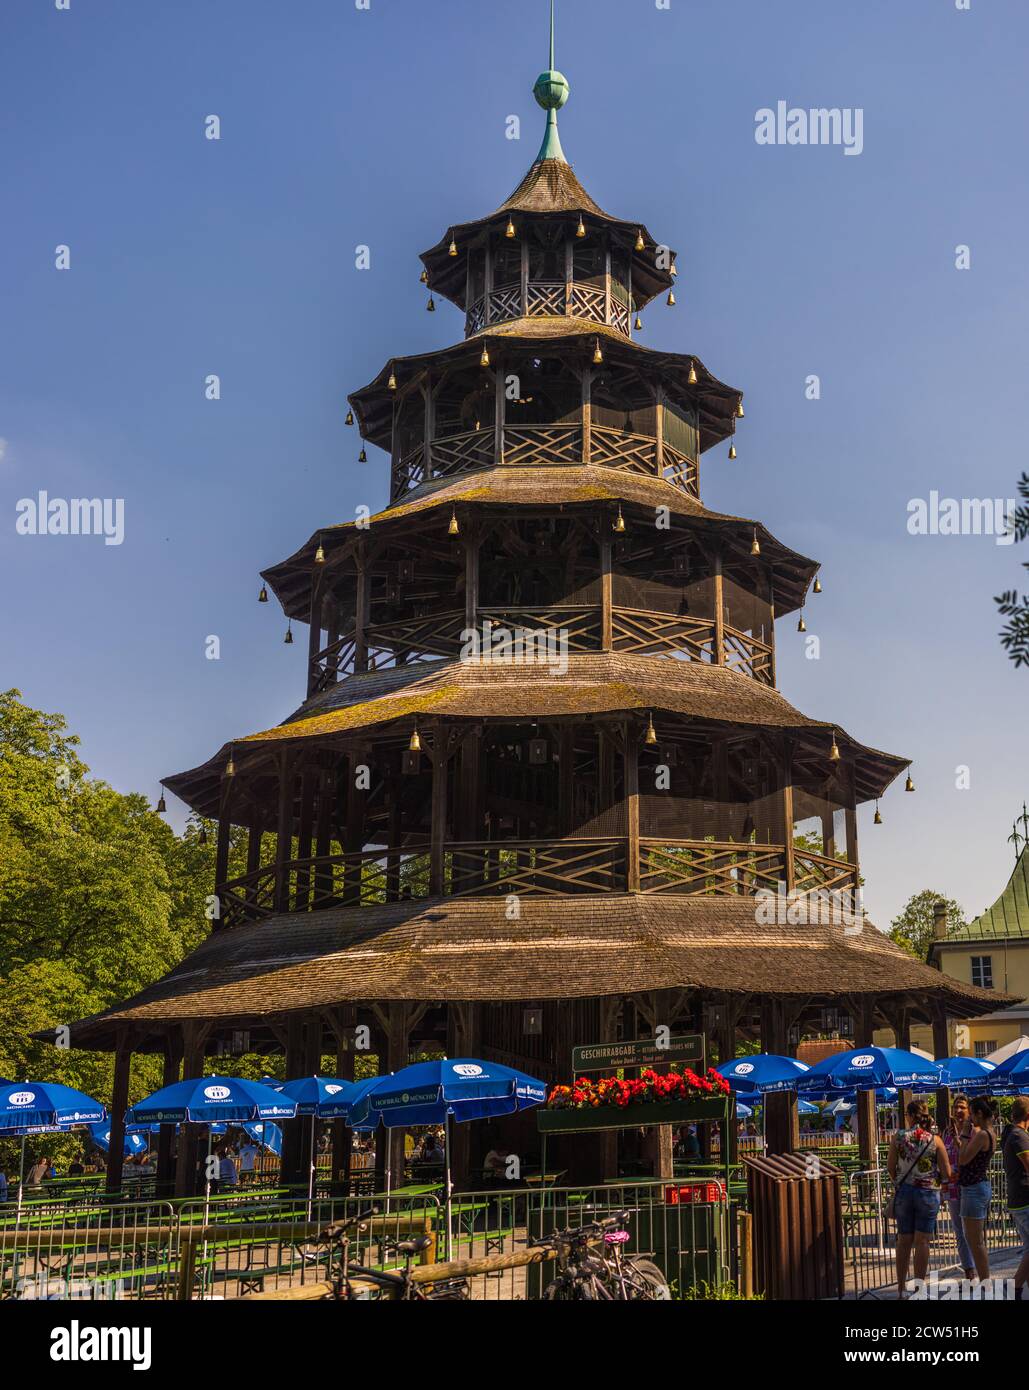 Munich, Germany - August 20, 2020: Chinese Tower in English gardens during challenging times of global pandemic. Stock Photo